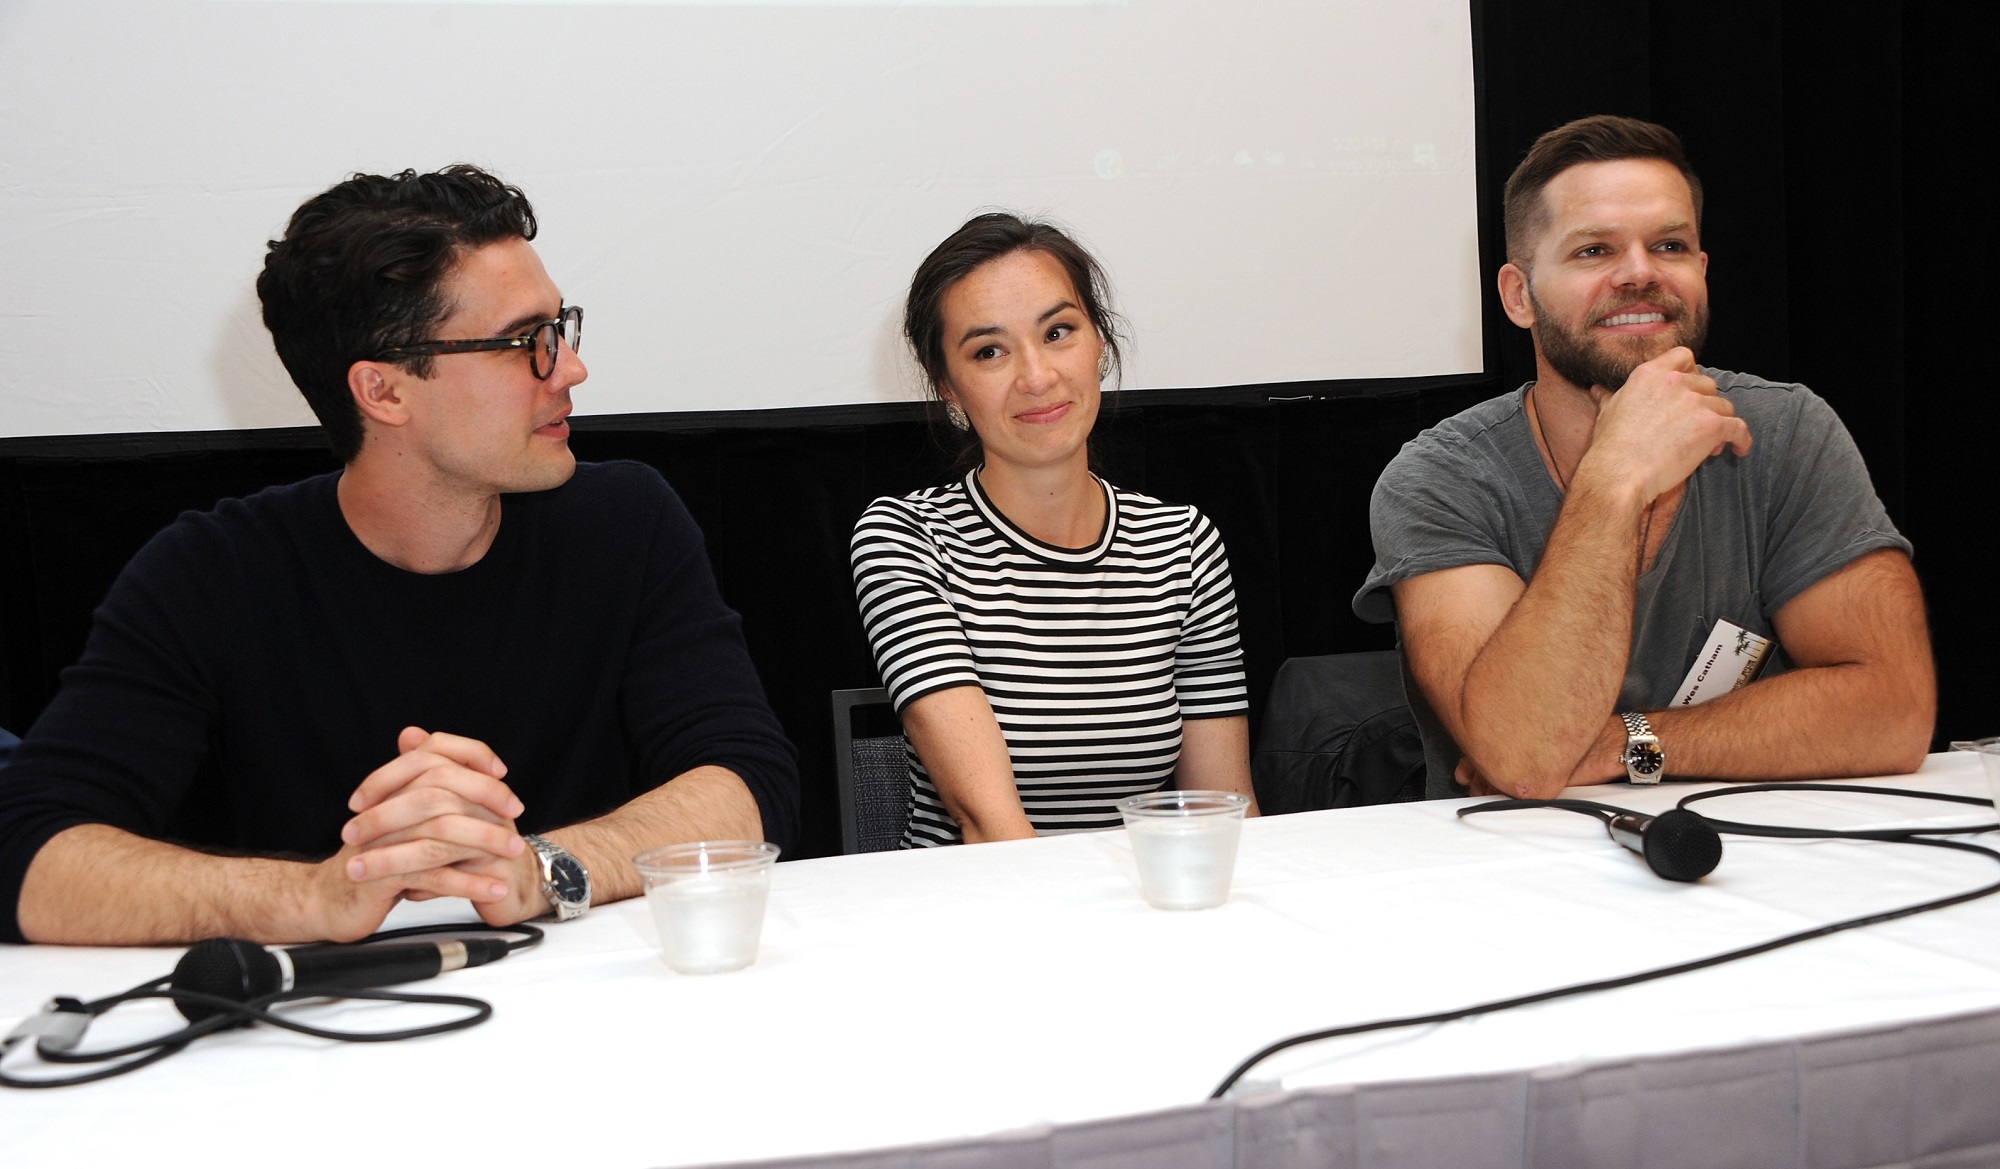 Steven Strait, Cara Geen and Wes Chatham of The Expanse